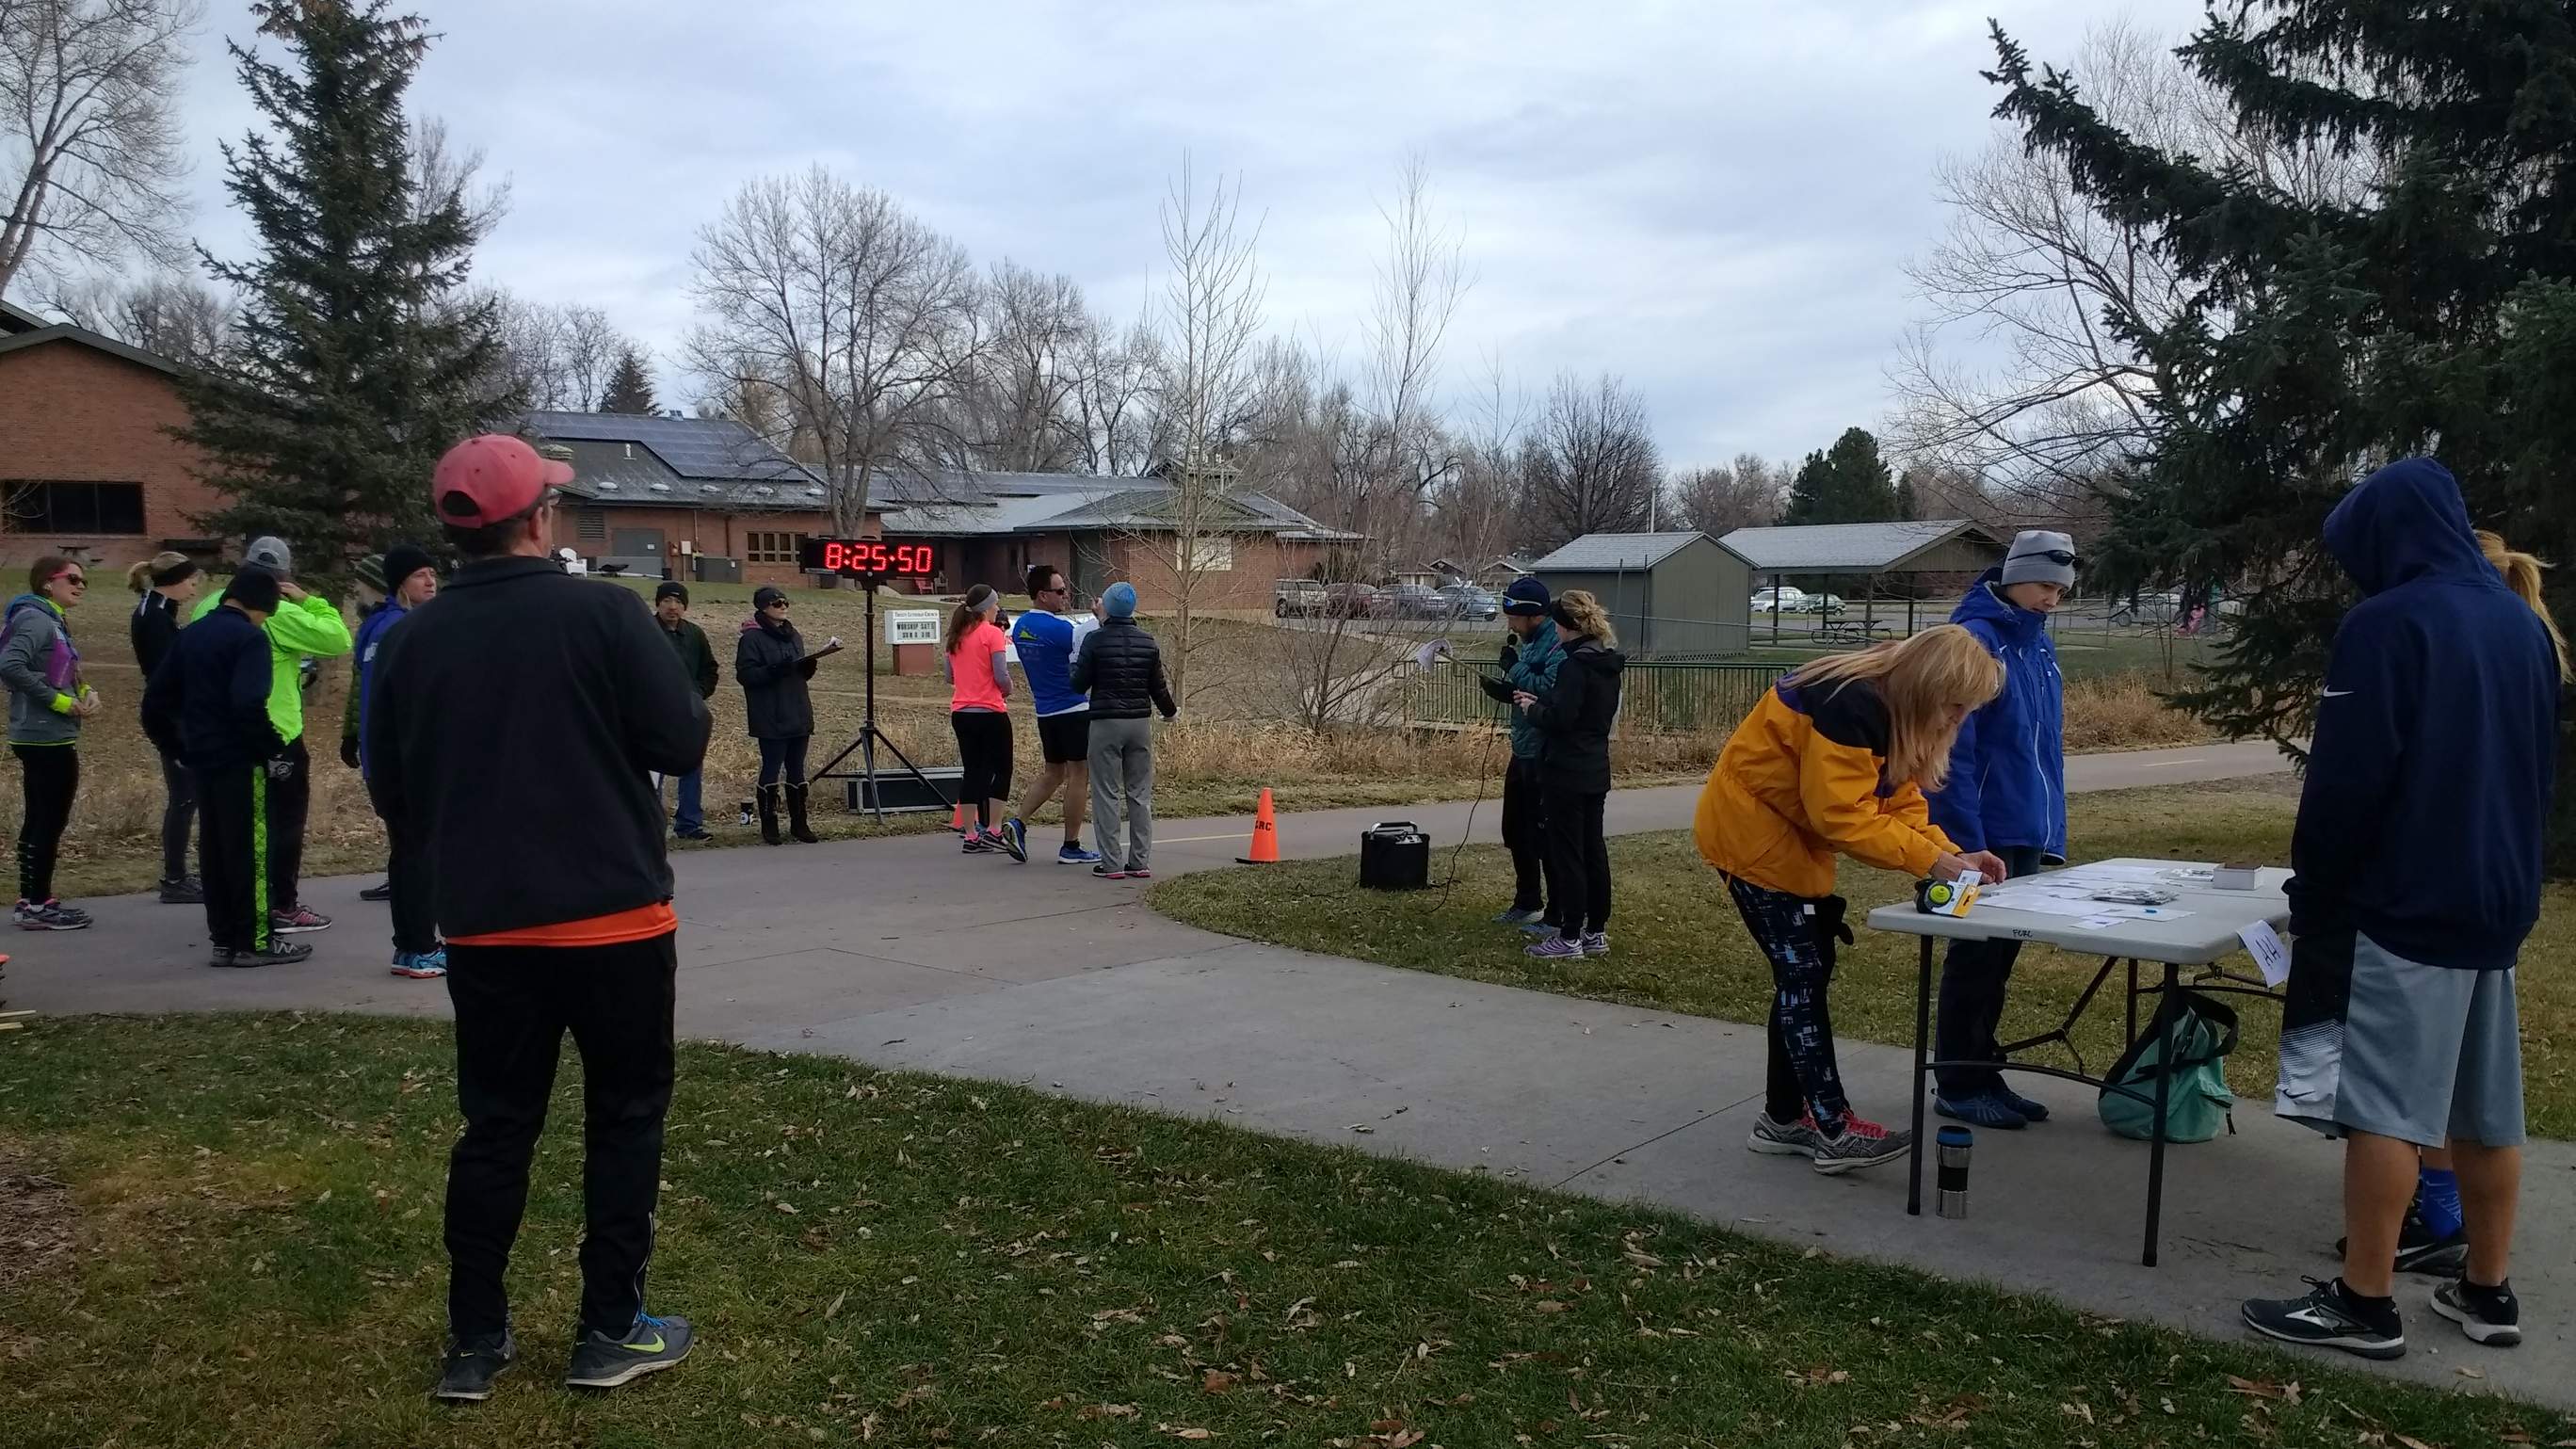 Runners and volunteers at the start of the Fort Collins Running Club's 2017 Spring Park 6k Tortoise & Hare race.